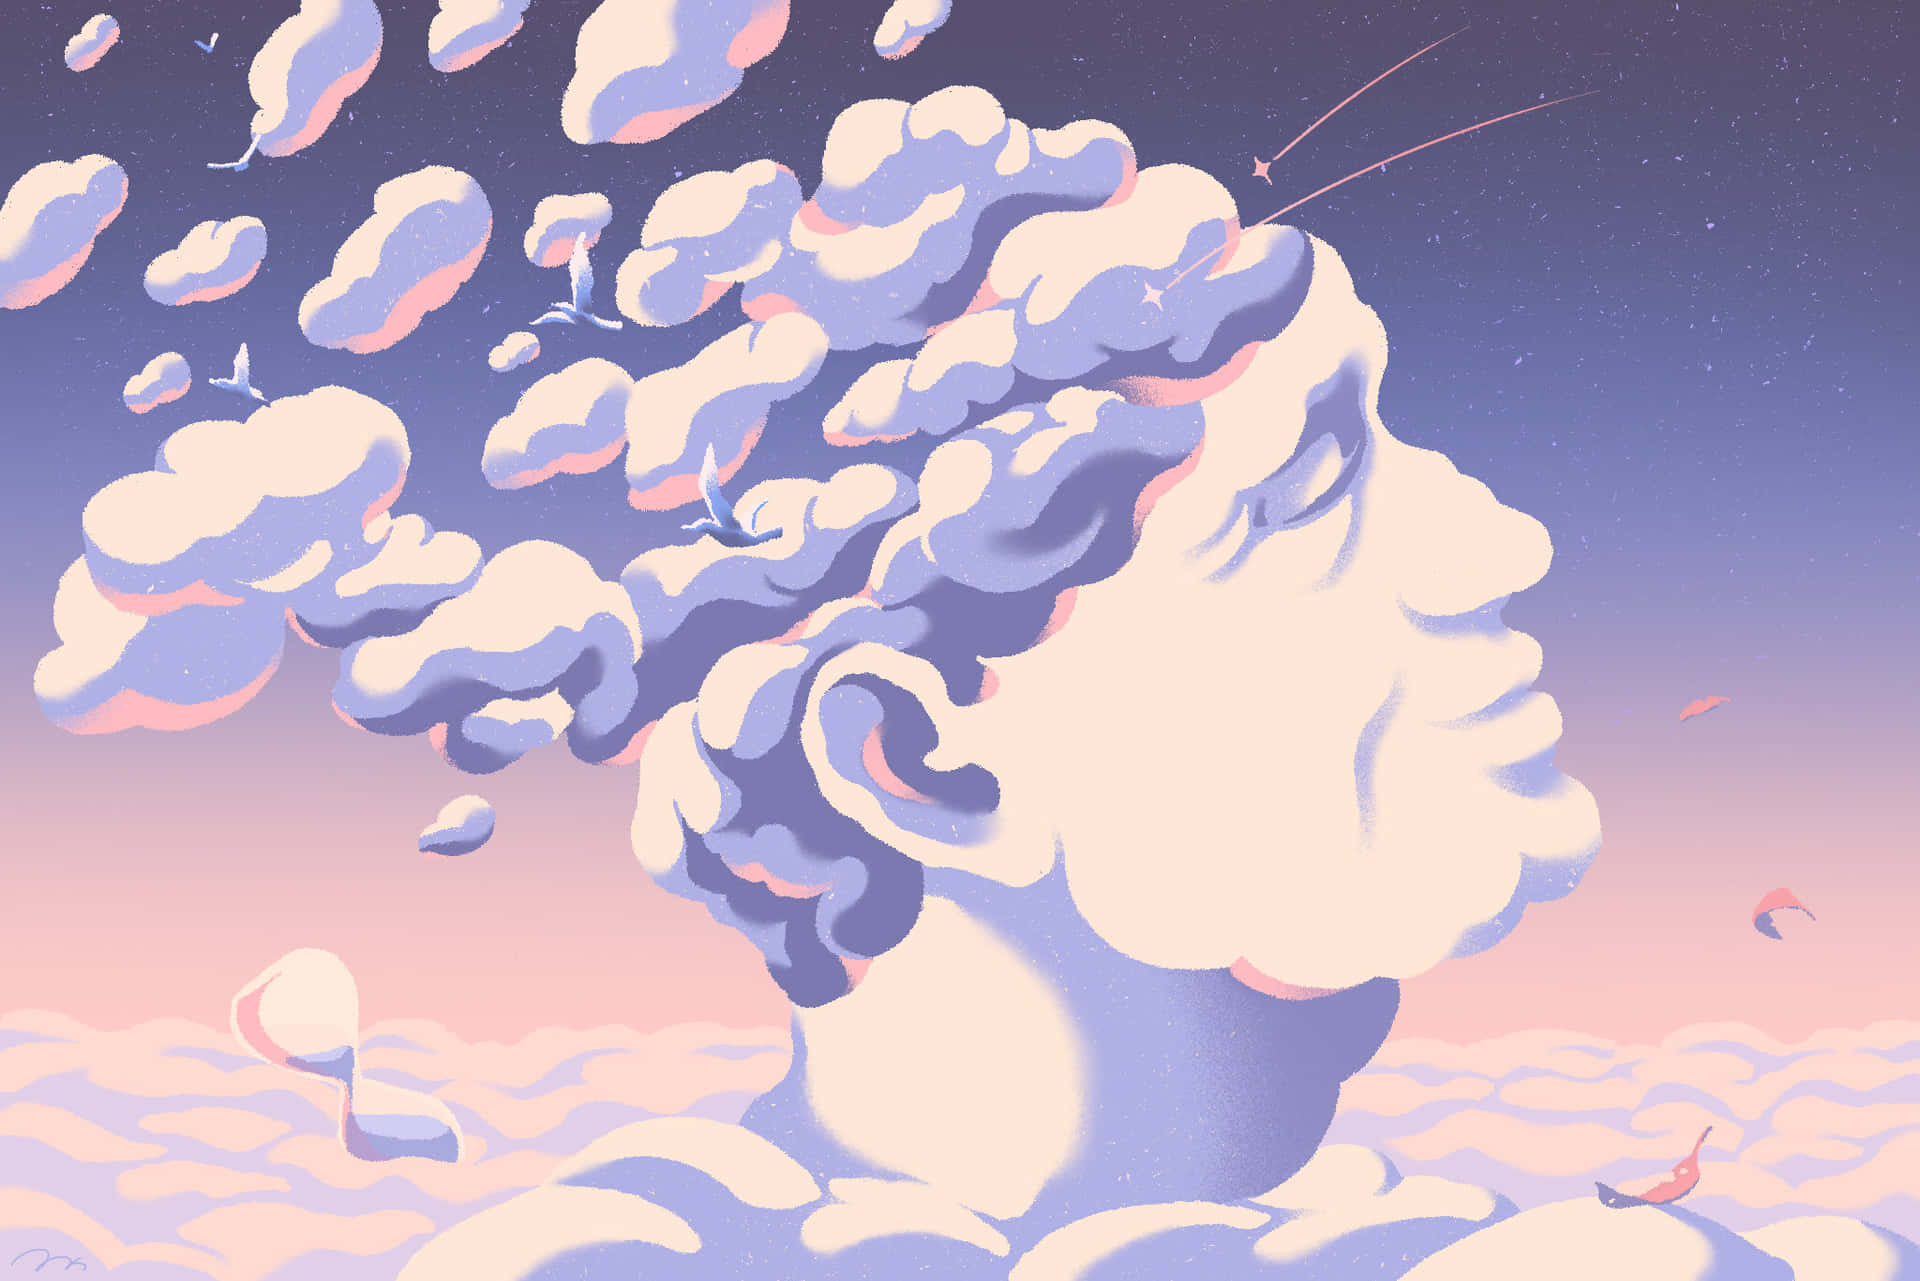 A Man's Head With Clouds In The Background